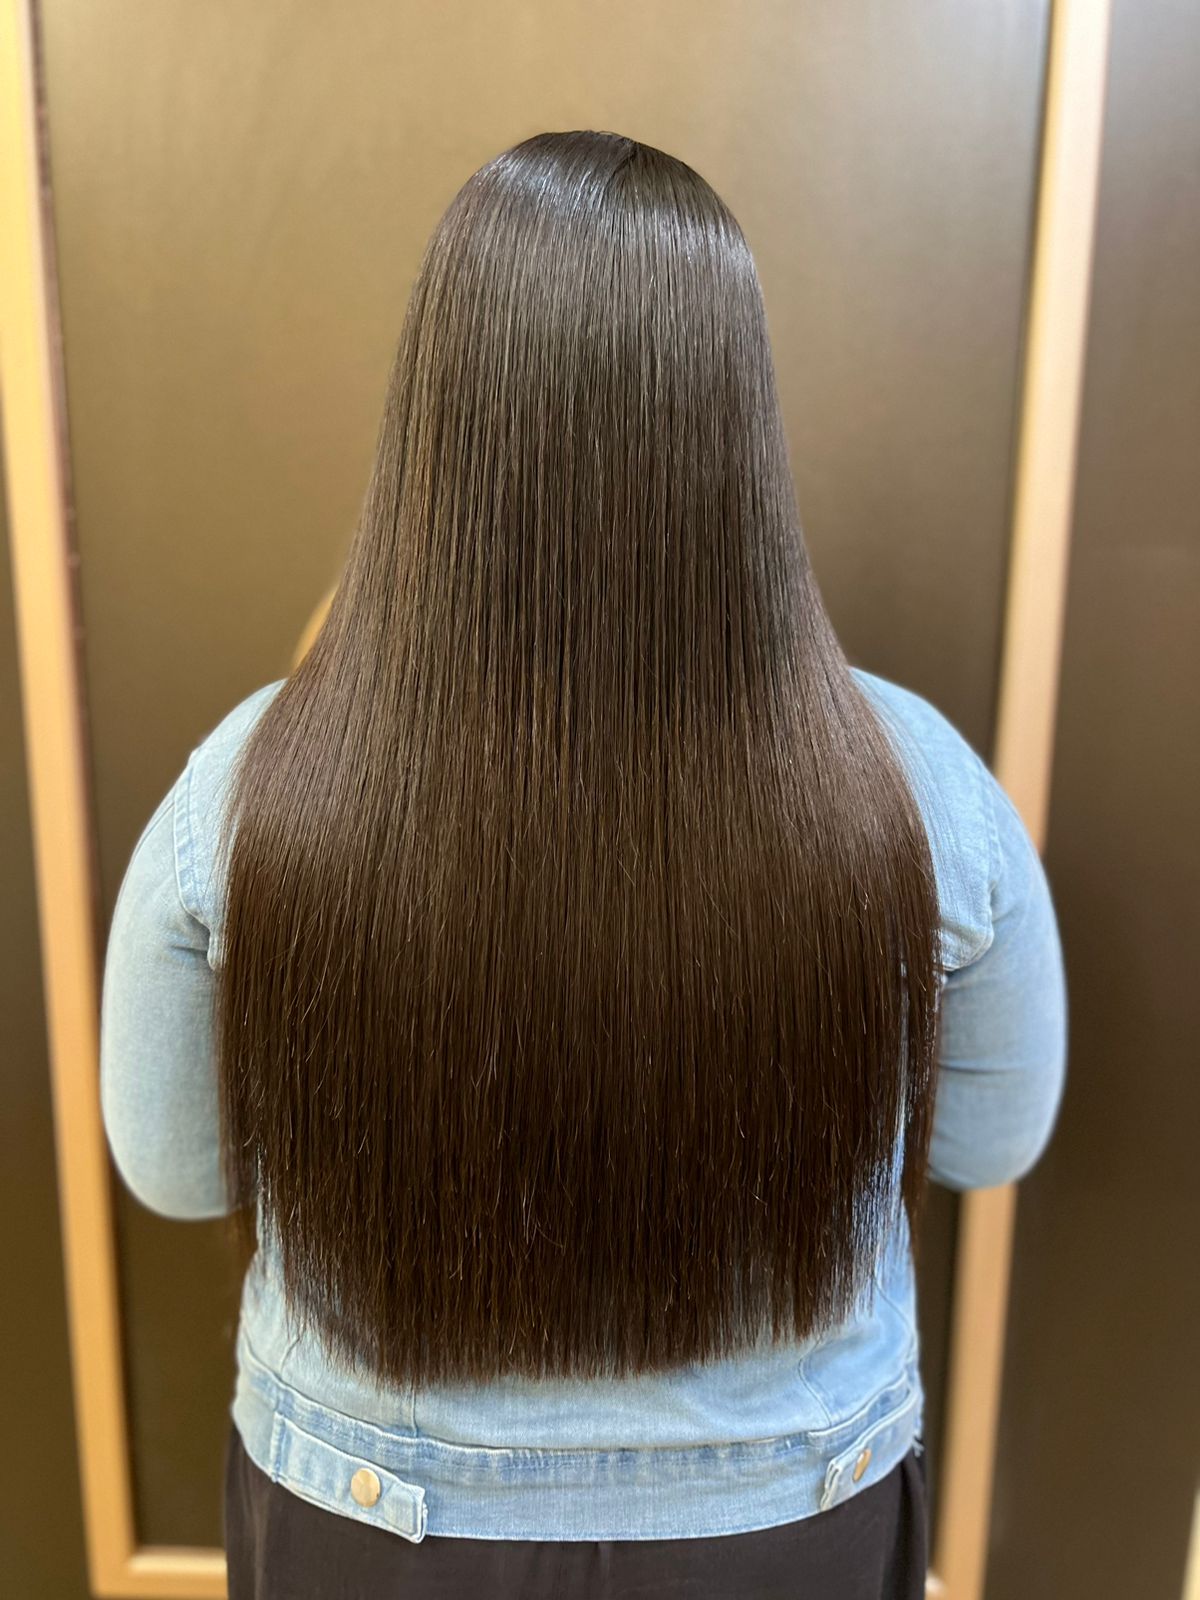 Experience the charm of silky, manageable hair with our Hair Smoothening services in Chennai. Our expert stylists use top-notch products and techniques, leaving your tresses irresistibly smooth and frizz-free